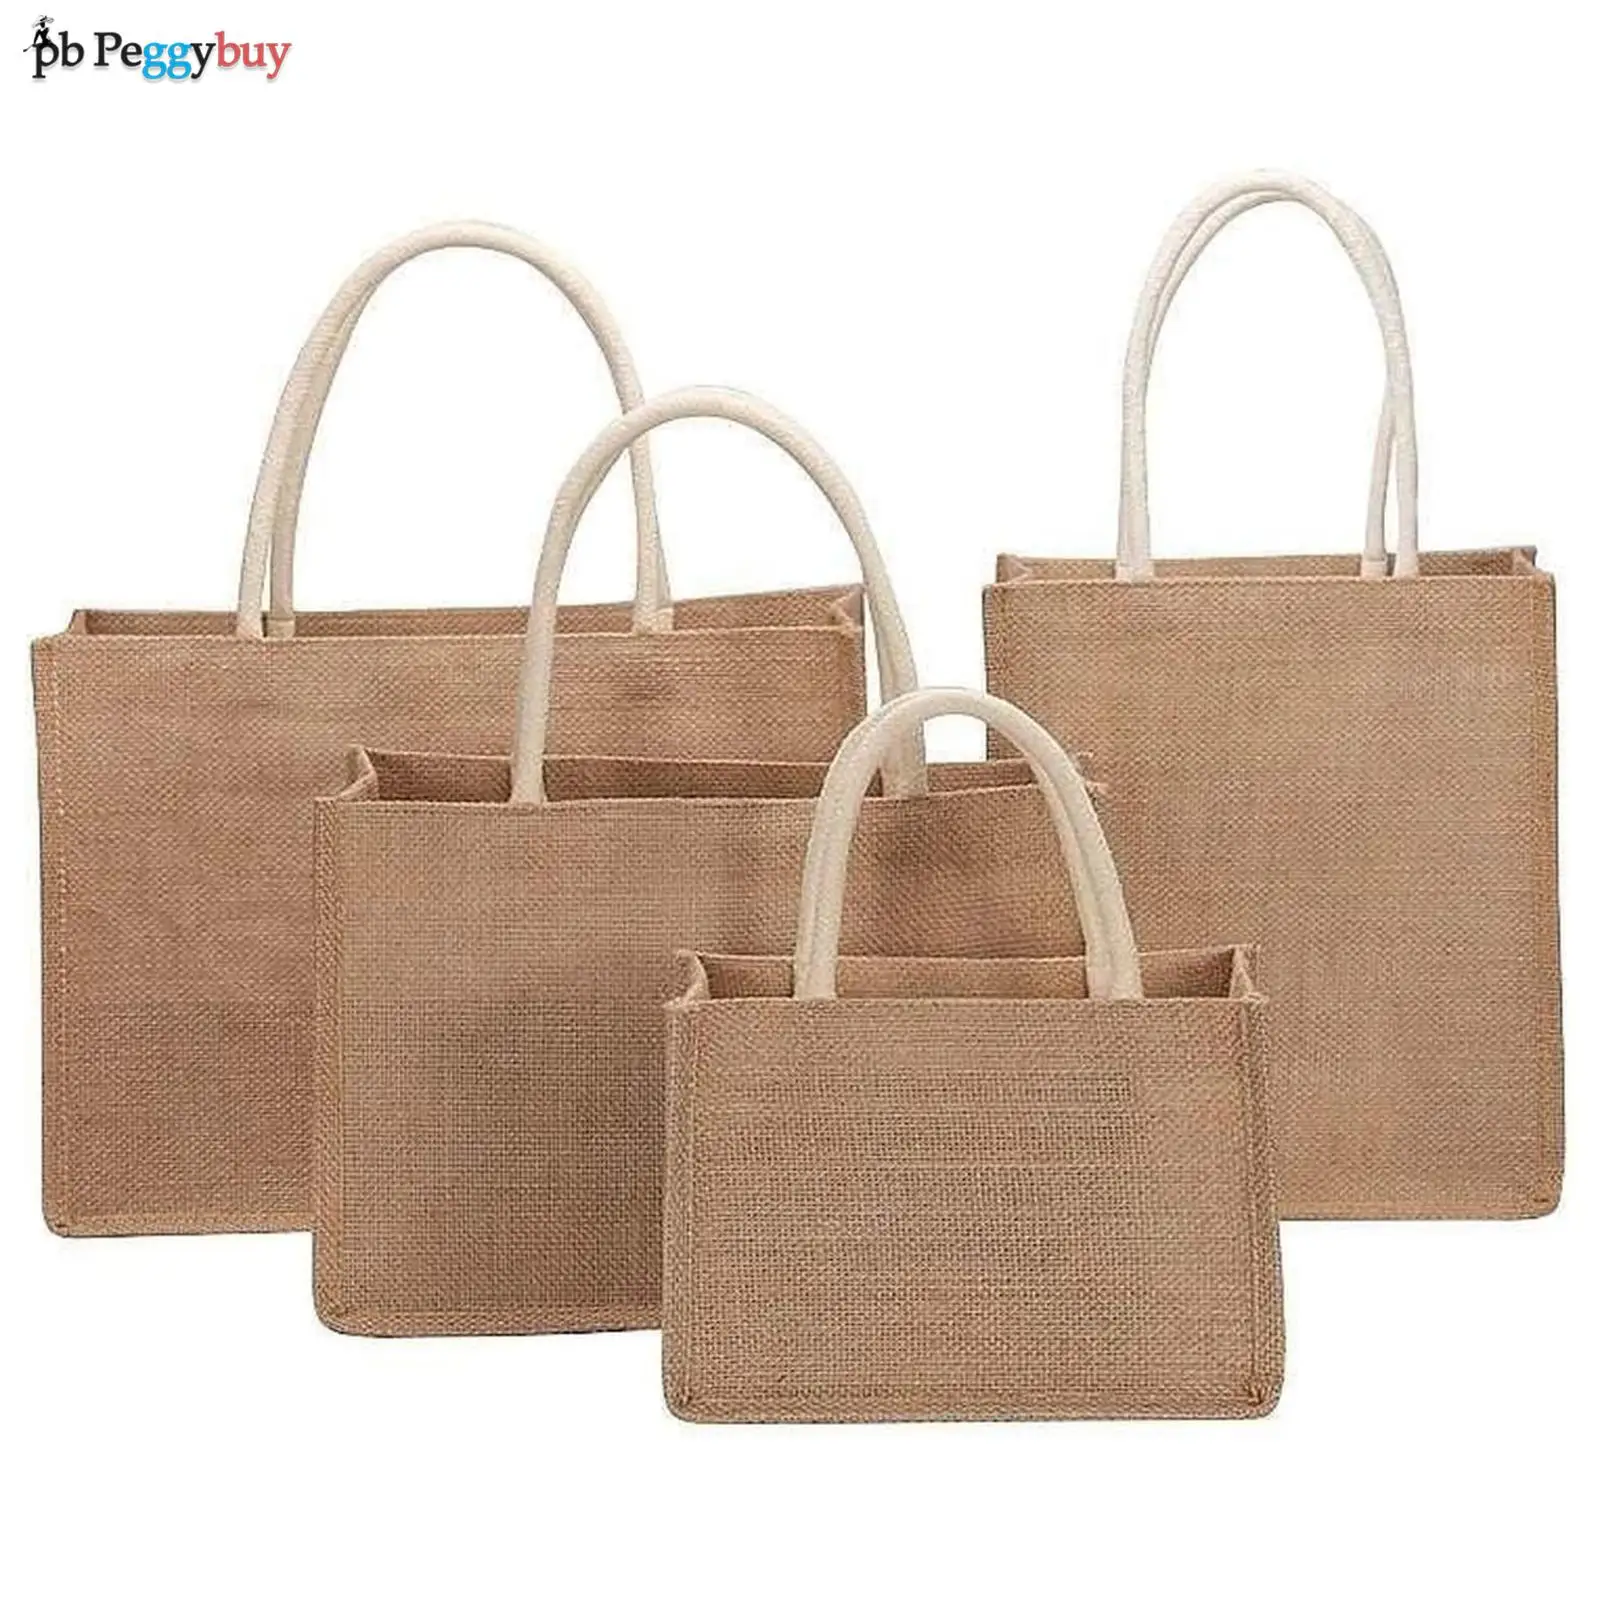 

Burlap Tote Bags Blank, Jute Beach Shopping Handbag, Vintage Reusable Gift Bags with Handle for Grocery Crafts Birthday Parties